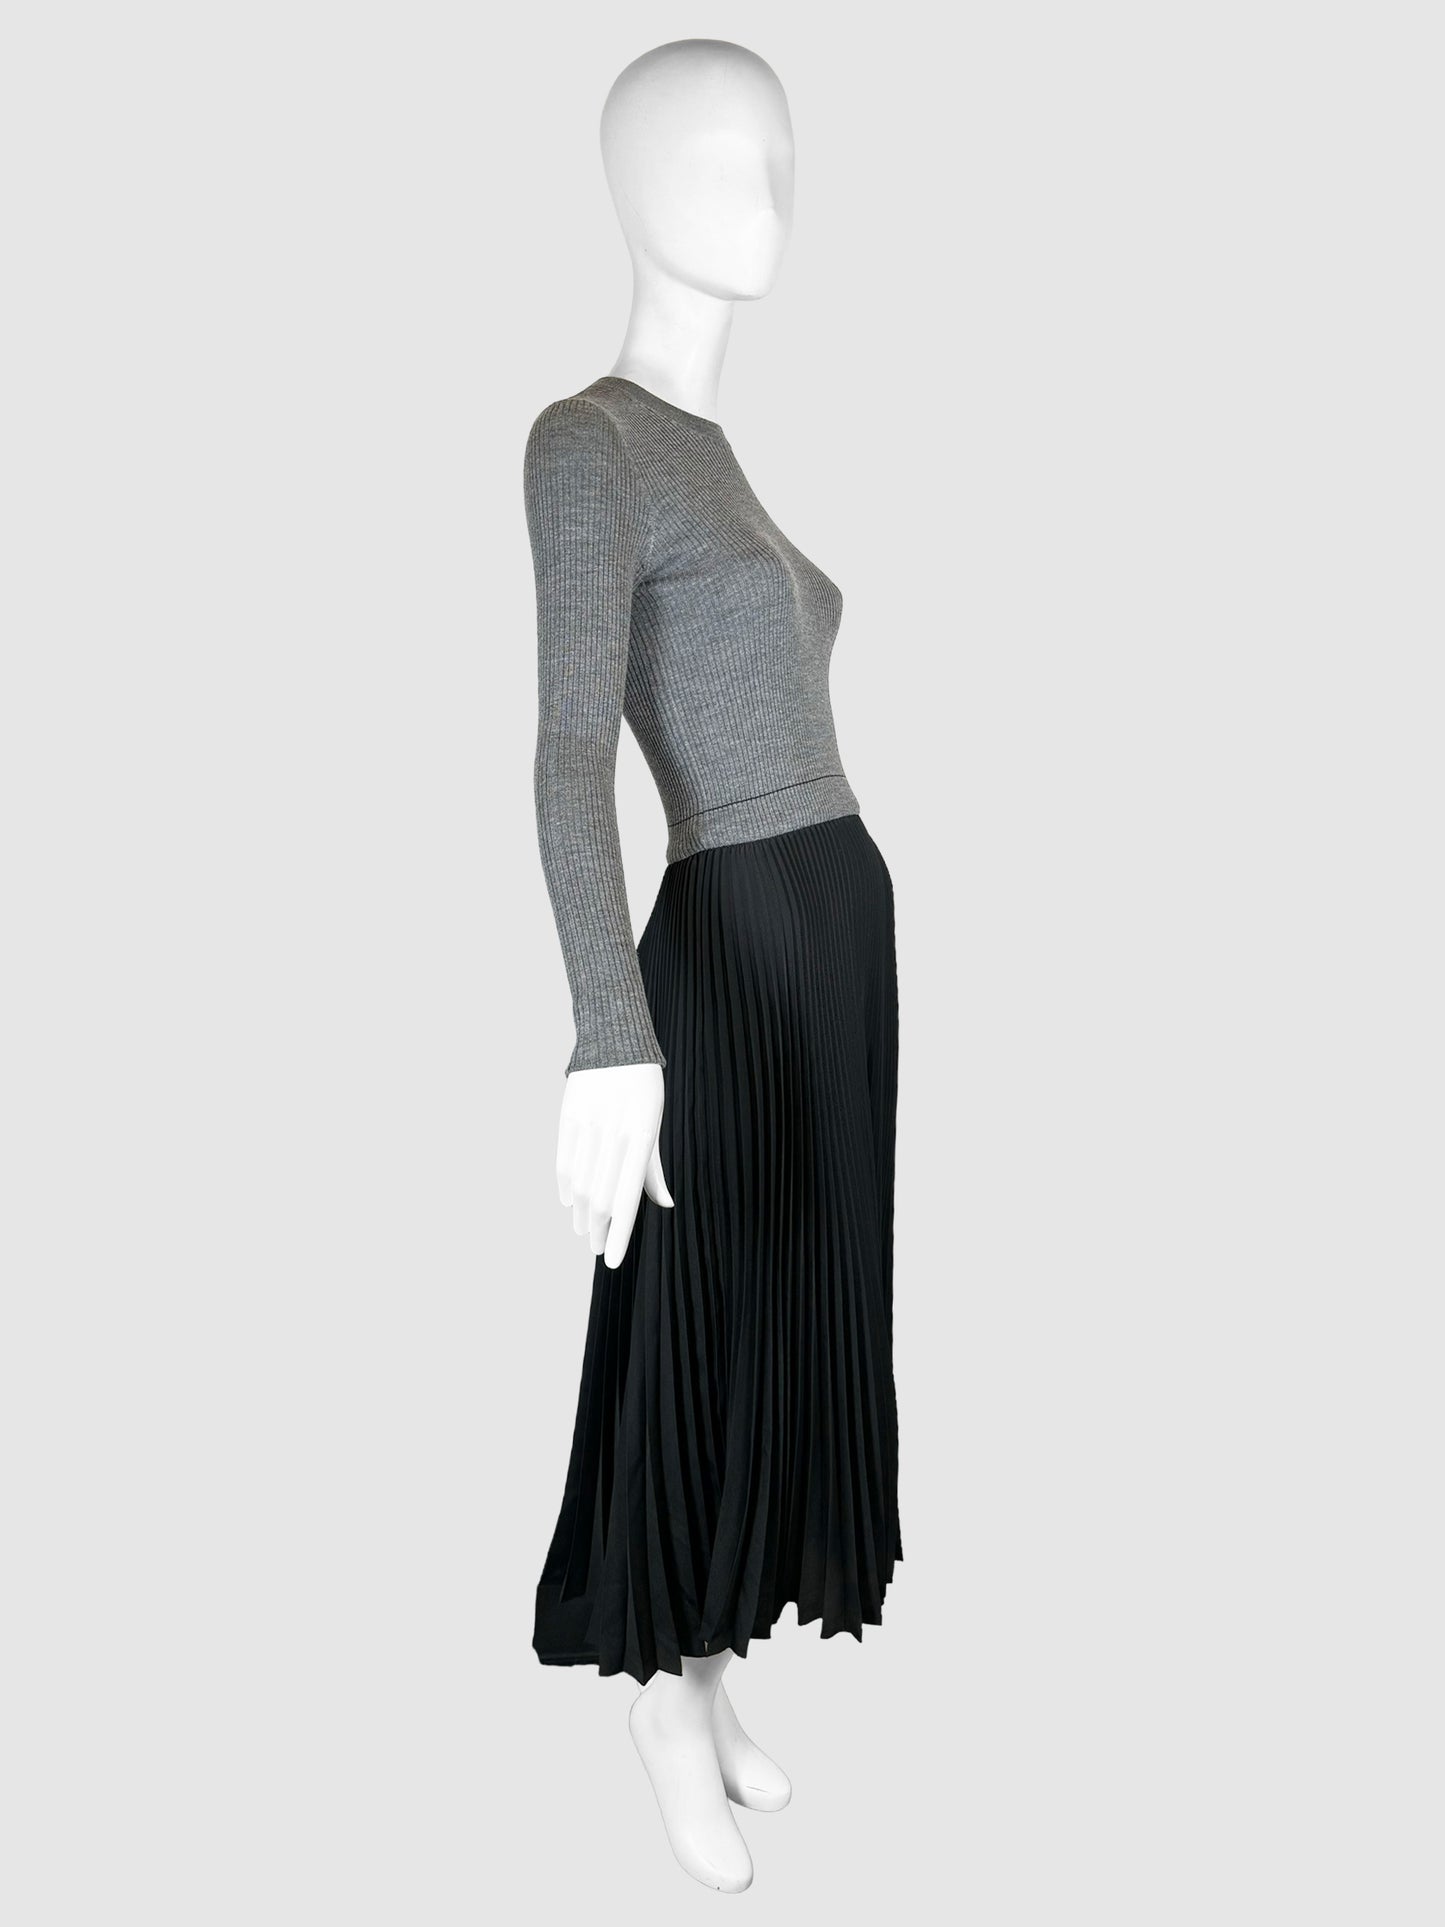 Two-Tone Pleated Dress - Size 42